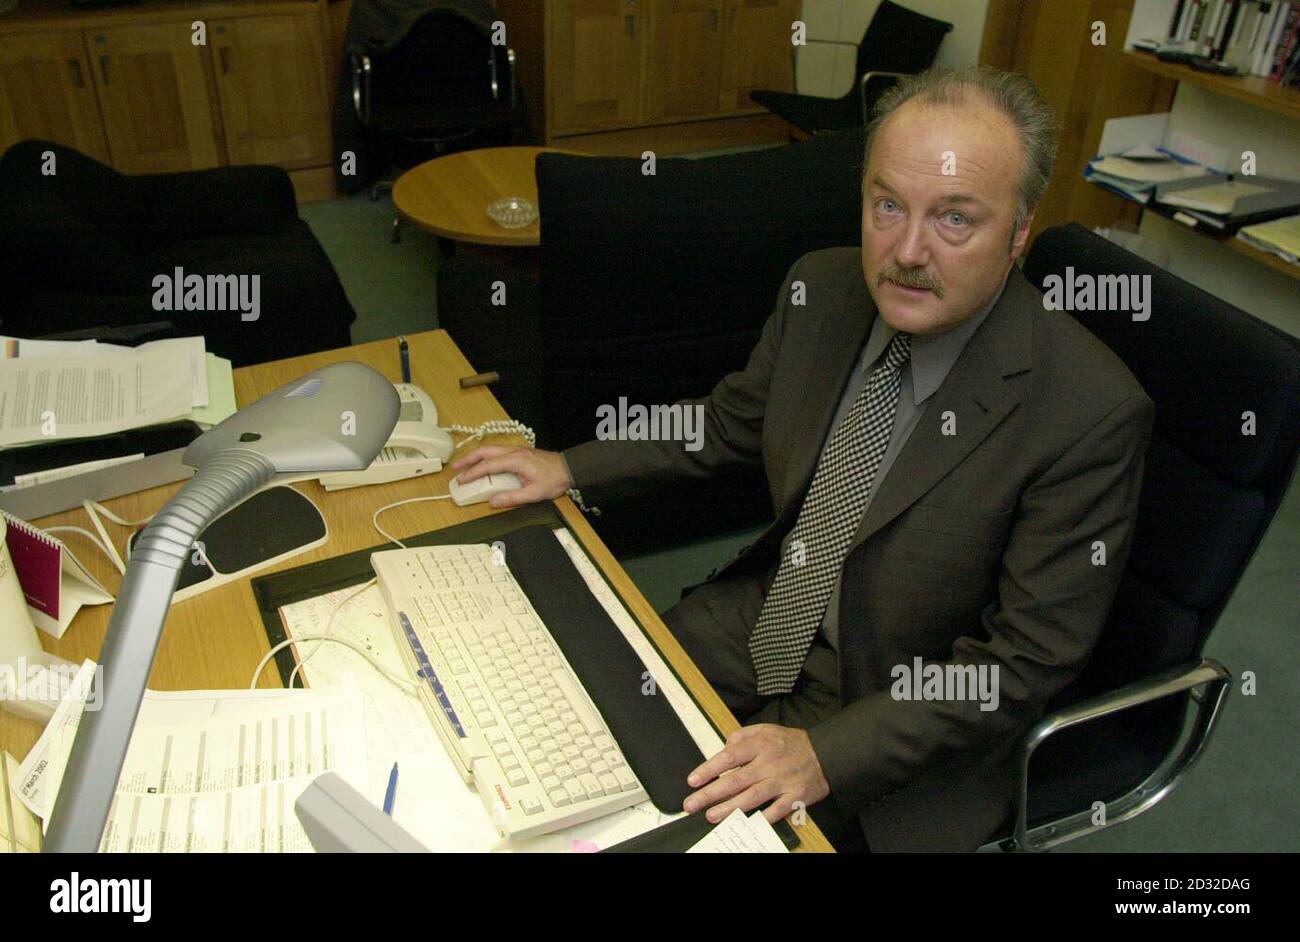 MP for Glasgow Kelvin in Scotland, George Galloway, is pictured in his London office inside Portcullis House, central London. Mr Galloway has been involved in a war of words with a junior foreign minister, Ben Bradshaw.  * ...in which Mr Galloway branded Bradshaw a 'liar' inside the House of Commons yesterday during a debate over sanctions on Iraq. Mr Bradshaw today retracted comments that he had first made to Galloway, whilst Galloway apologised for his own personal outburst.  Stock Photo